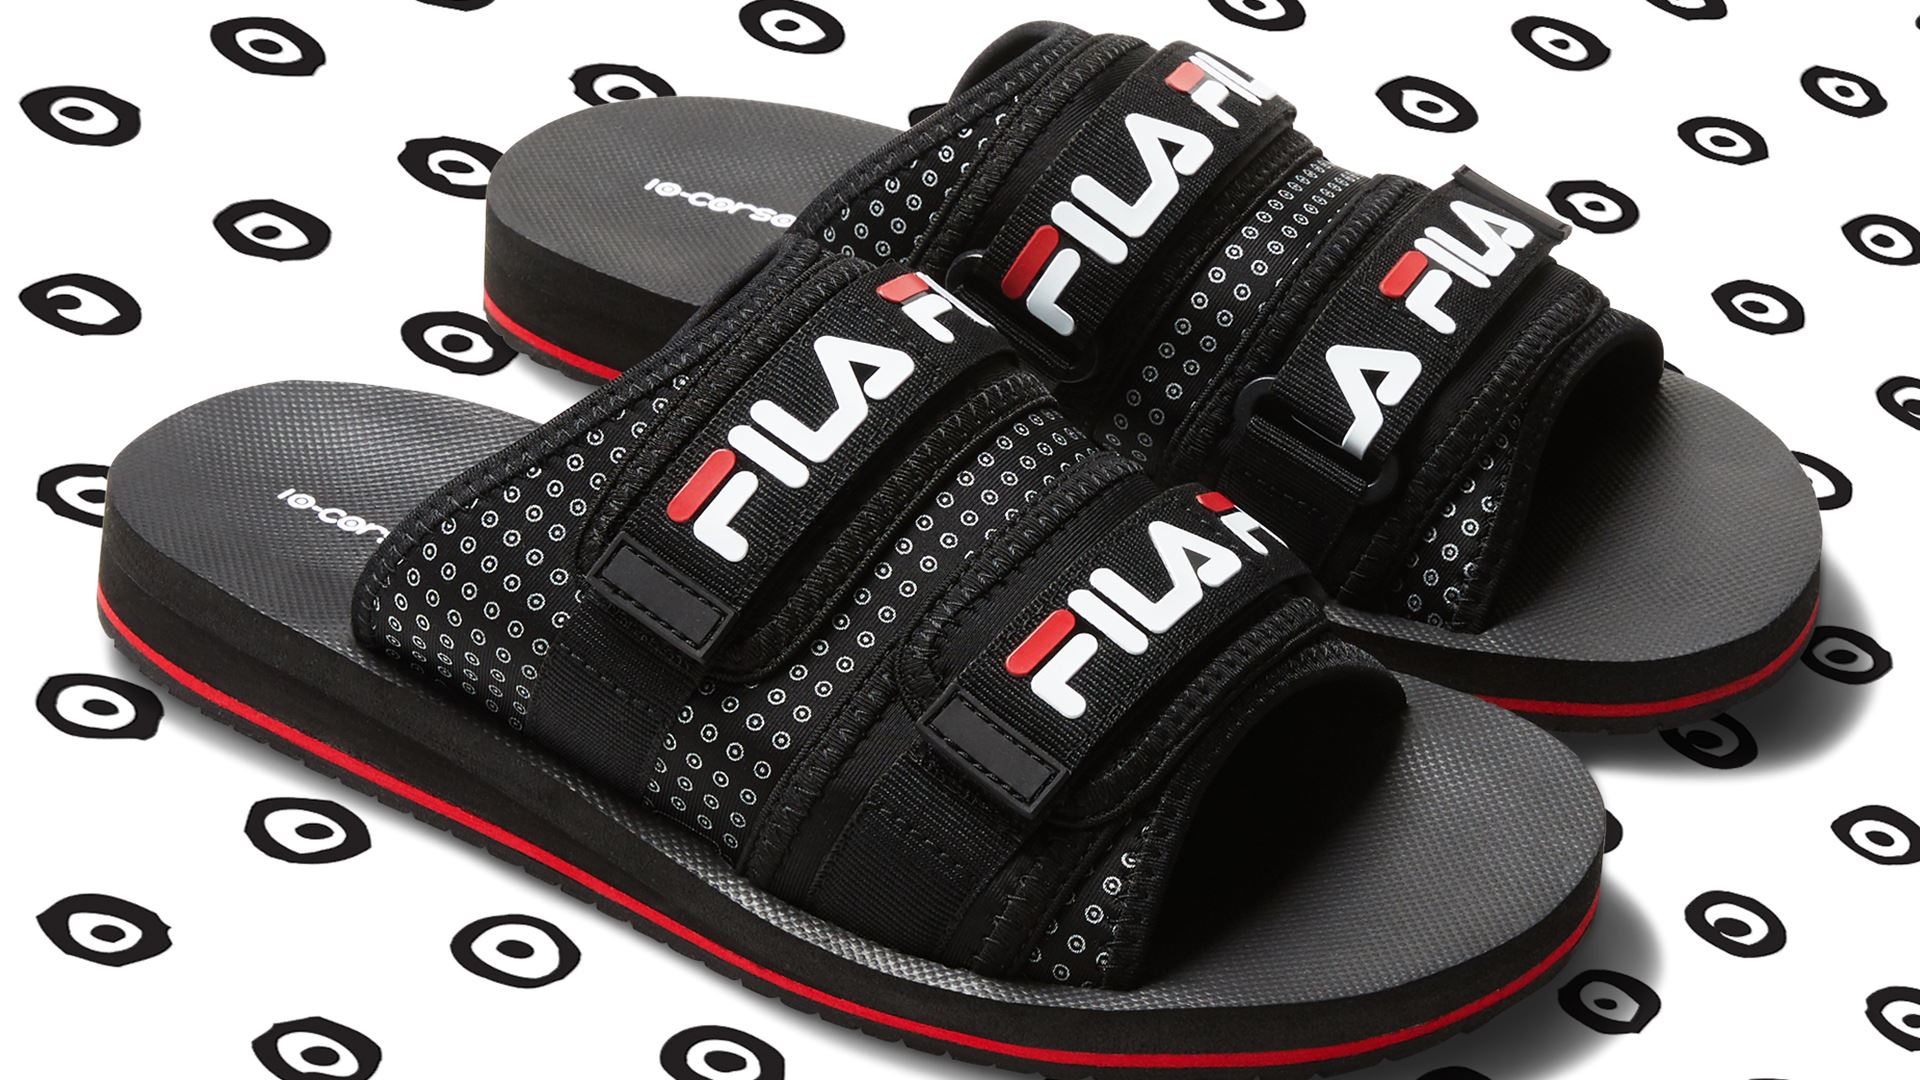 FILA and 10 Corso Como New York Launch Limited Edition Footwear Collaboration